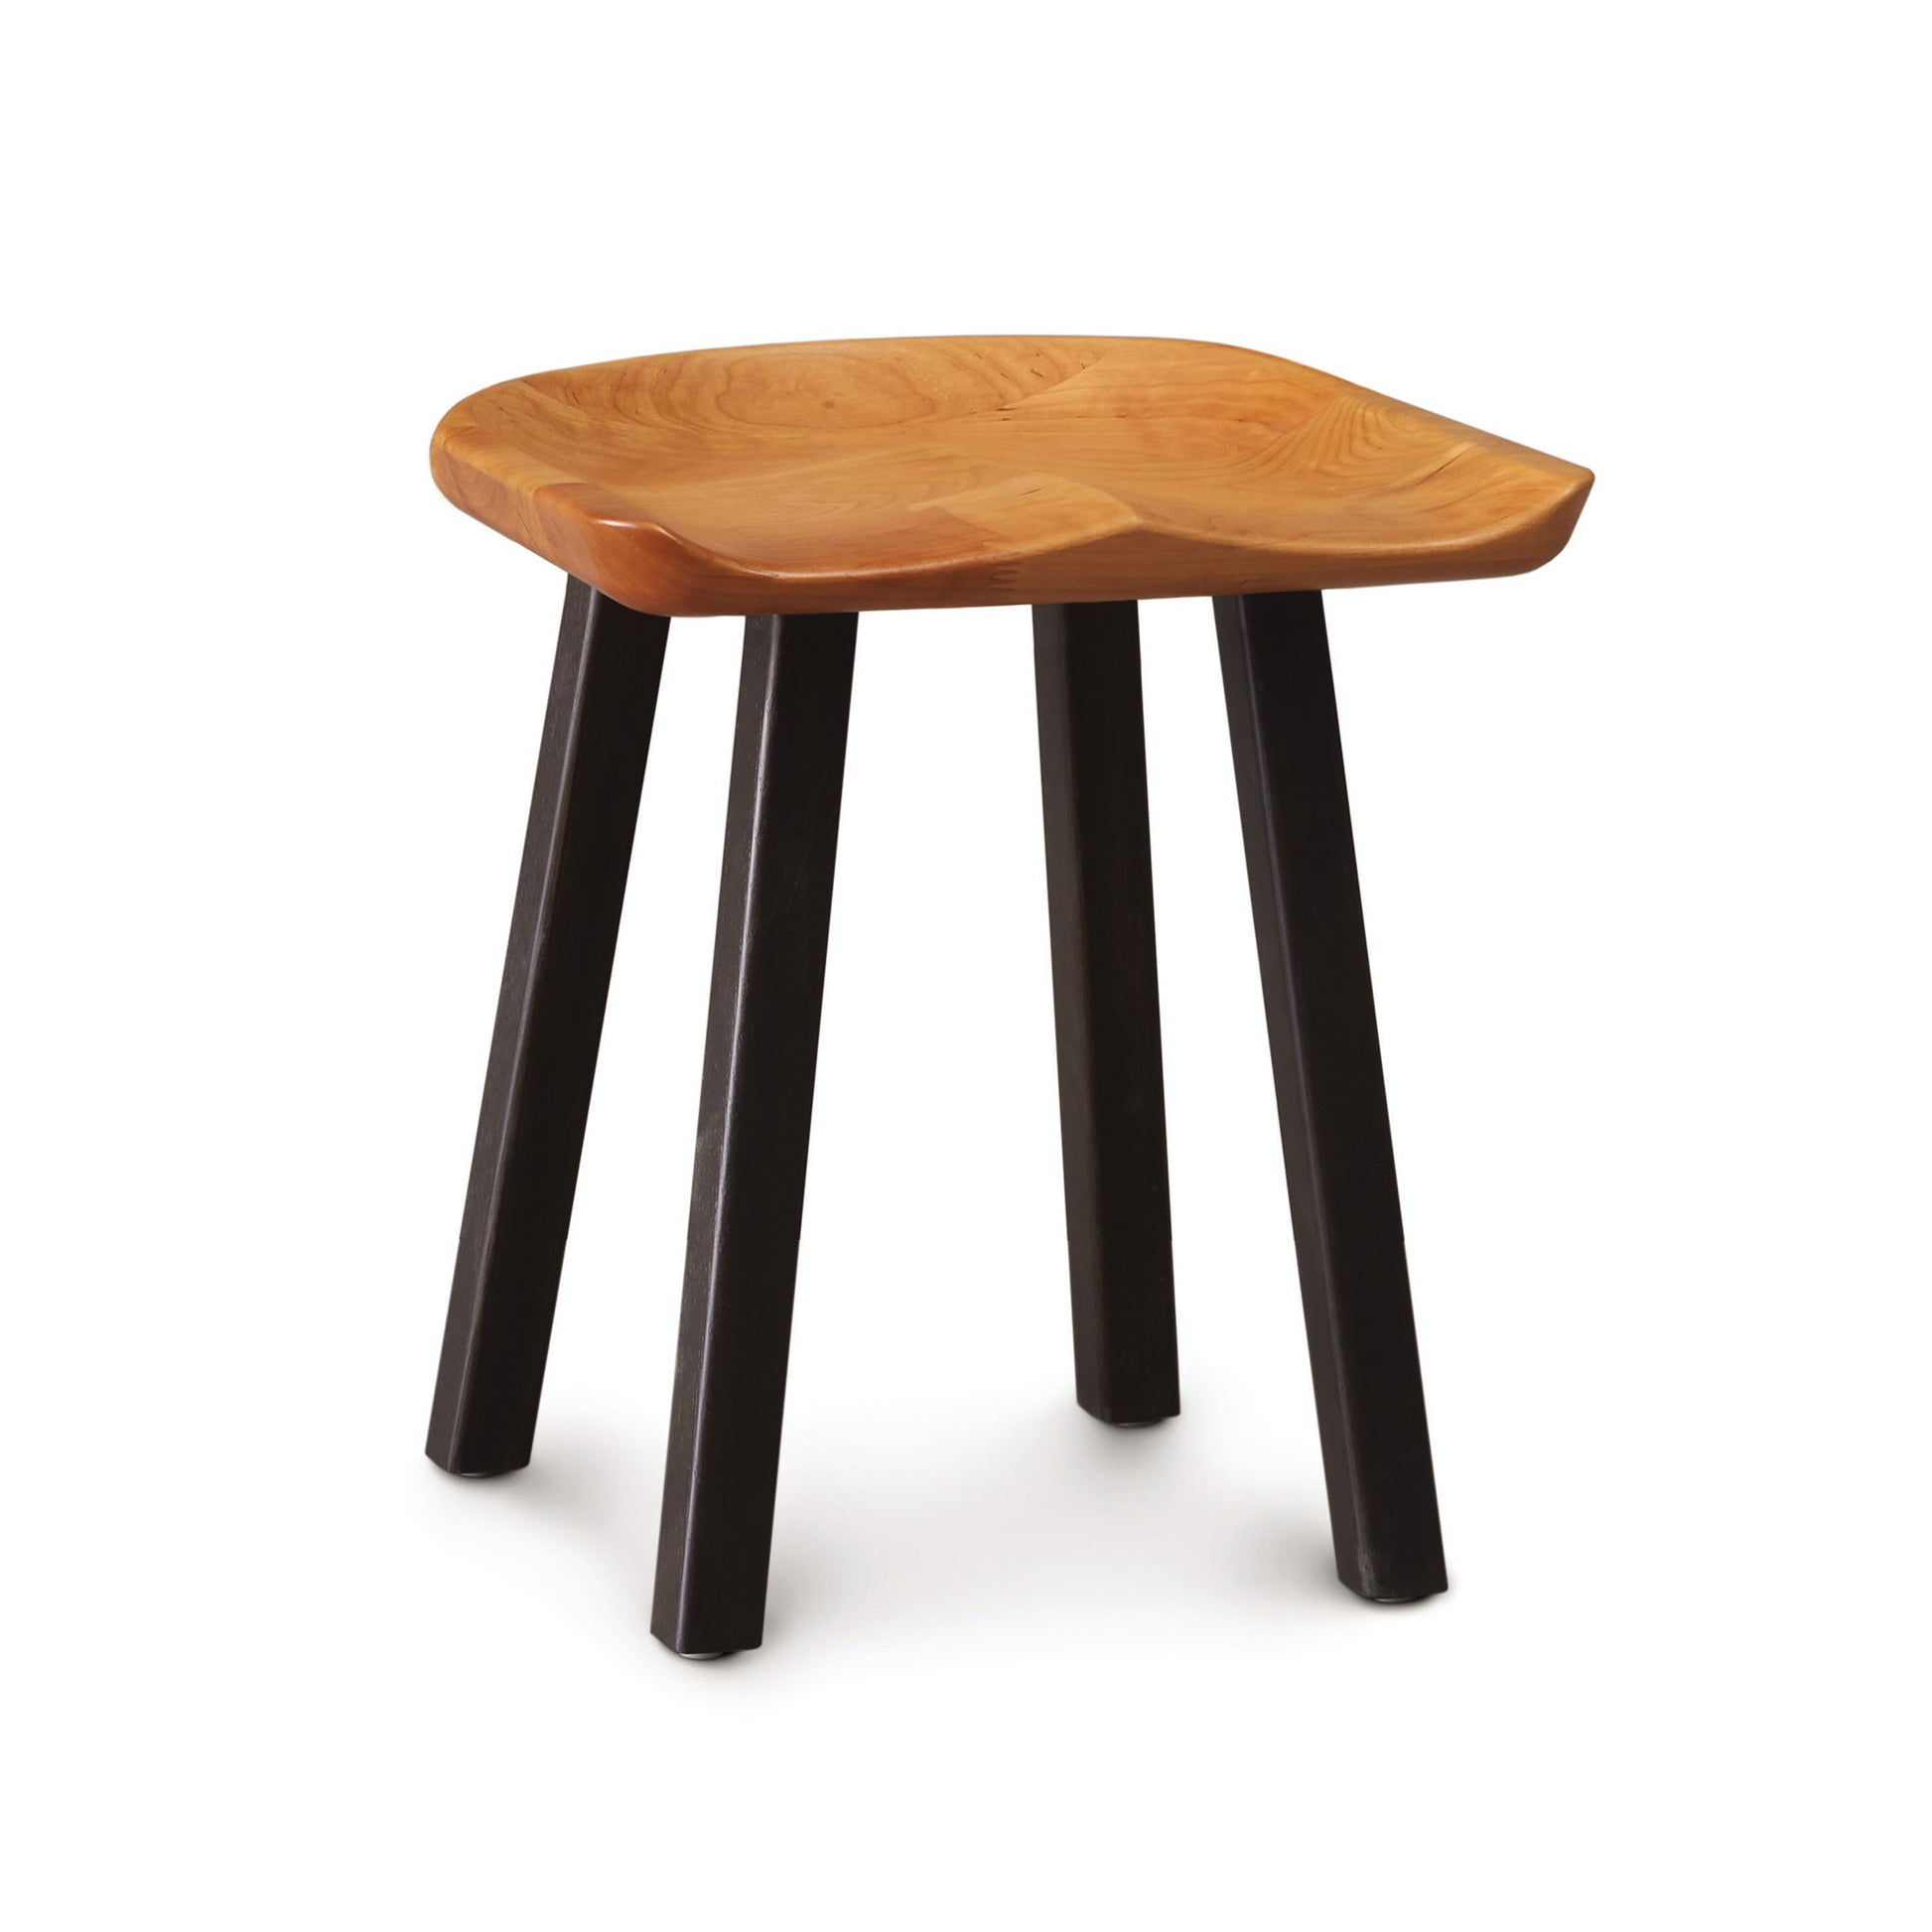 A stool with a wooden seat and black legs.